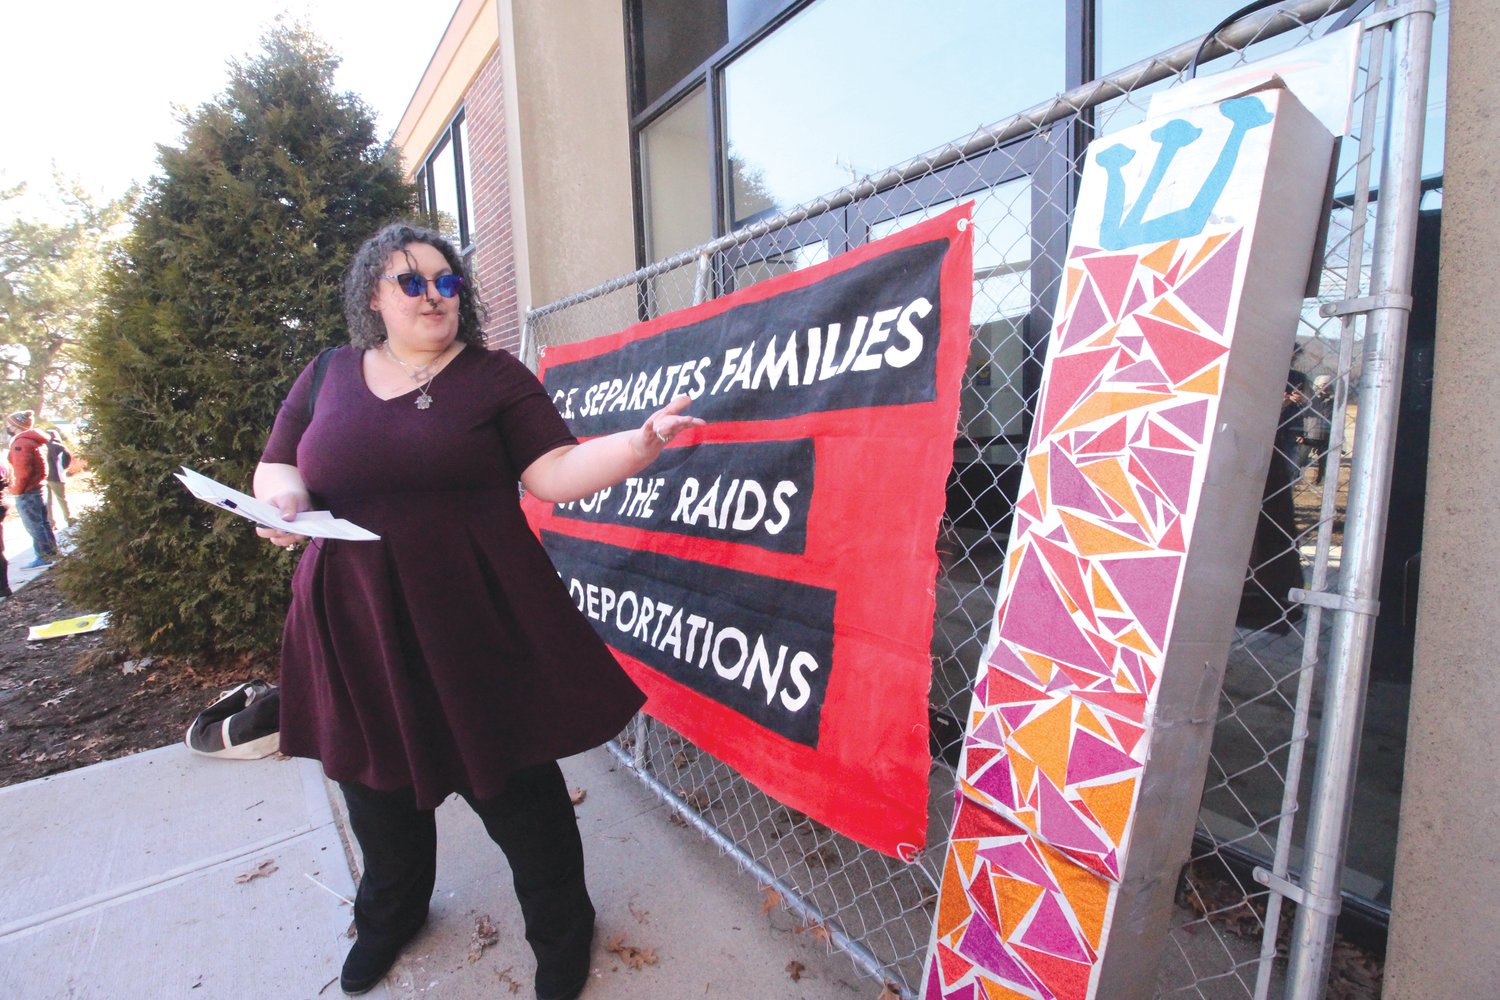 RALLY CALL: Dr. Aurit Lazerus was one of the organizers for the rally on Sunday against the ICE facility that is soon expected to be operated at 443 Jefferson Boulevard.